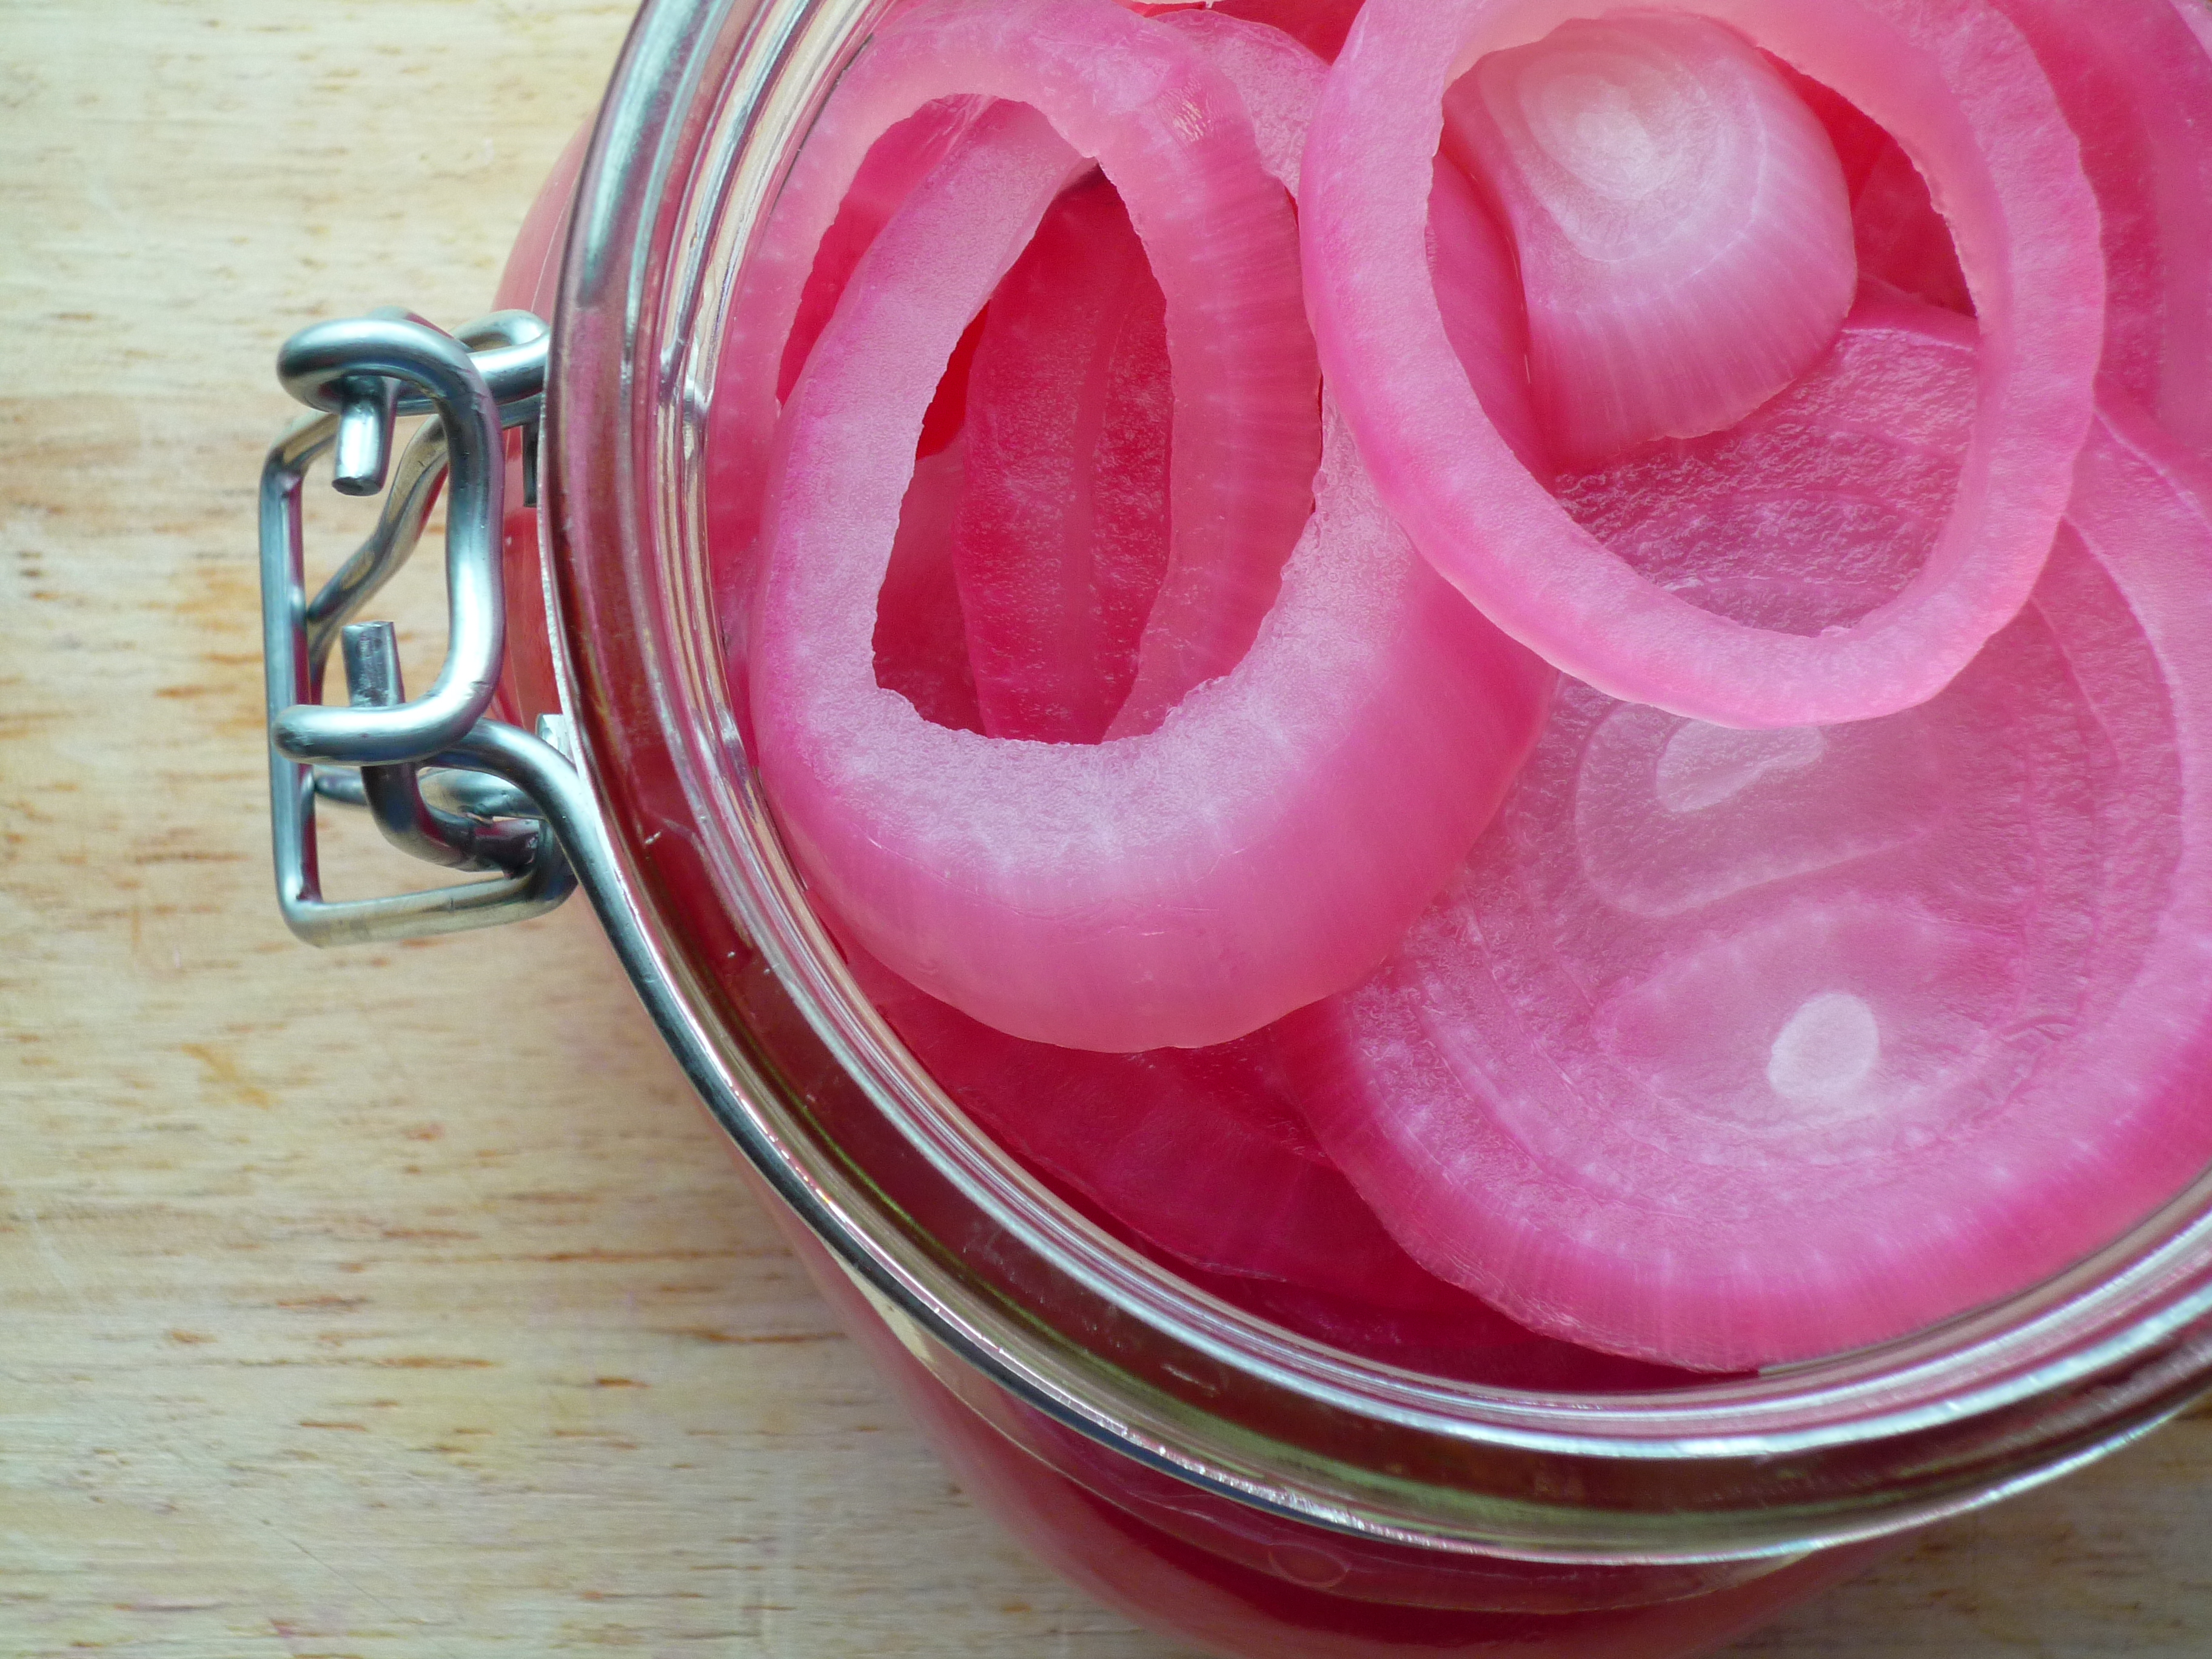 Doctors Confirmed Red Onions Do Wonders For the Thyroid Glands source-Pinterest